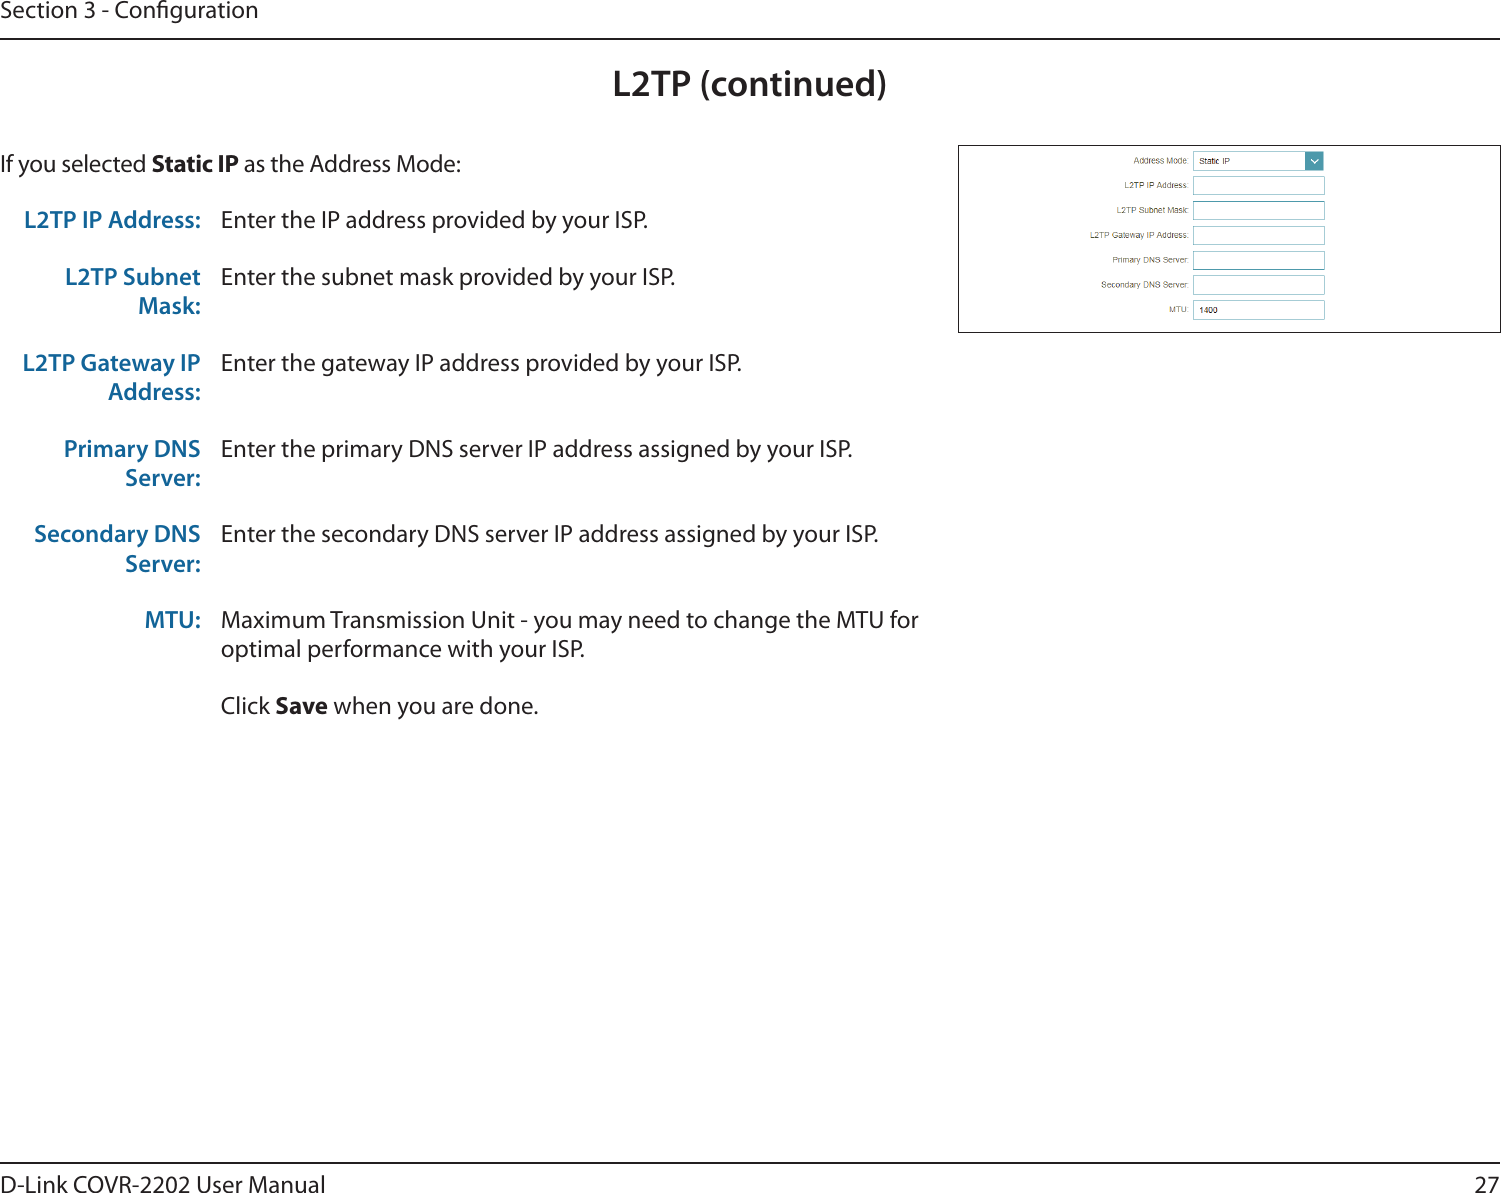 27D-Link COVR-2202 User ManualSection 3 - CongurationL2TP (continued)If you selected Static IP as the Address Mode:L2TP IP Address: Enter the IP address provided by your ISP.L2TP Subnet Mask:Enter the subnet mask provided by your ISP.L2TP Gateway IP Address:Enter the gateway IP address provided by your ISP.Primary DNS Server:Enter the primary DNS server IP address assigned by your ISP.Secondary DNS Server:Enter the secondary DNS server IP address assigned by your ISP.MTU: Maximum Transmission Unit - you may need to change the MTU for optimal performance with your ISP.Click Save when you are done.